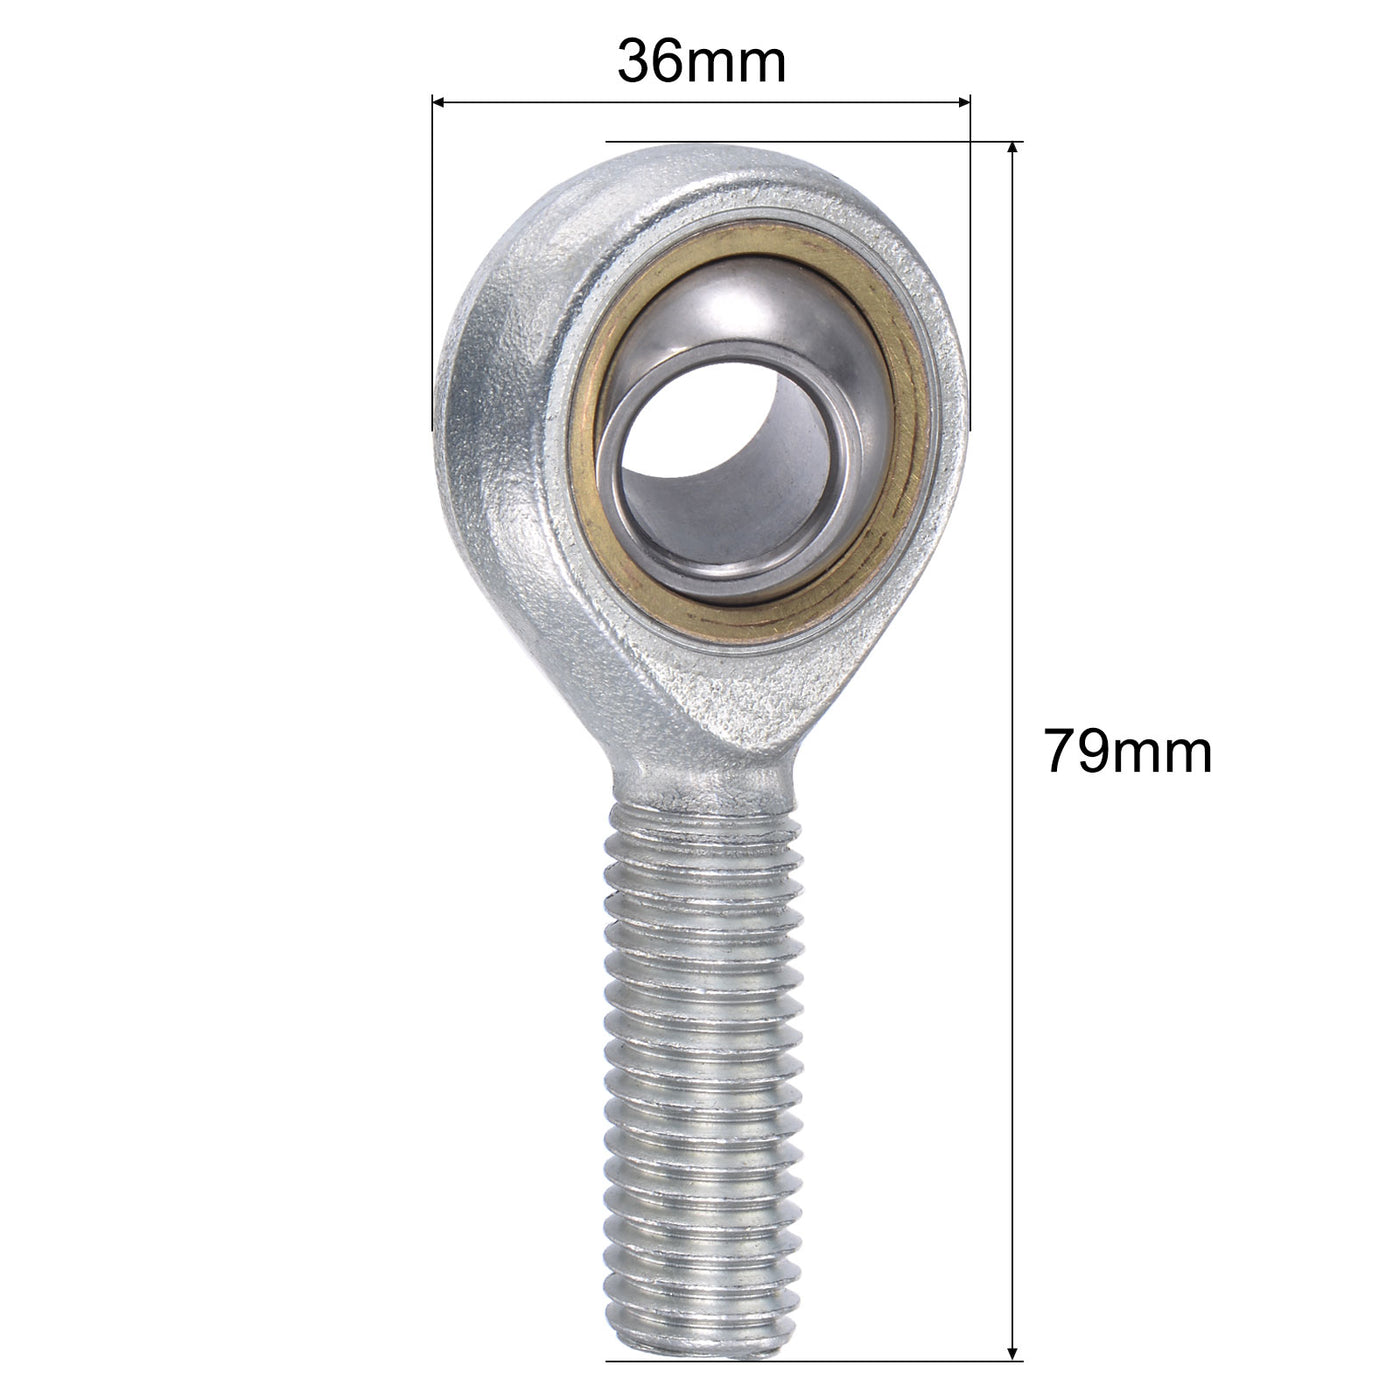 uxcell Uxcell SA14TK POSA14 Rod End Bearing 14mm Bore M14x2.0 Left Hand Male Thread